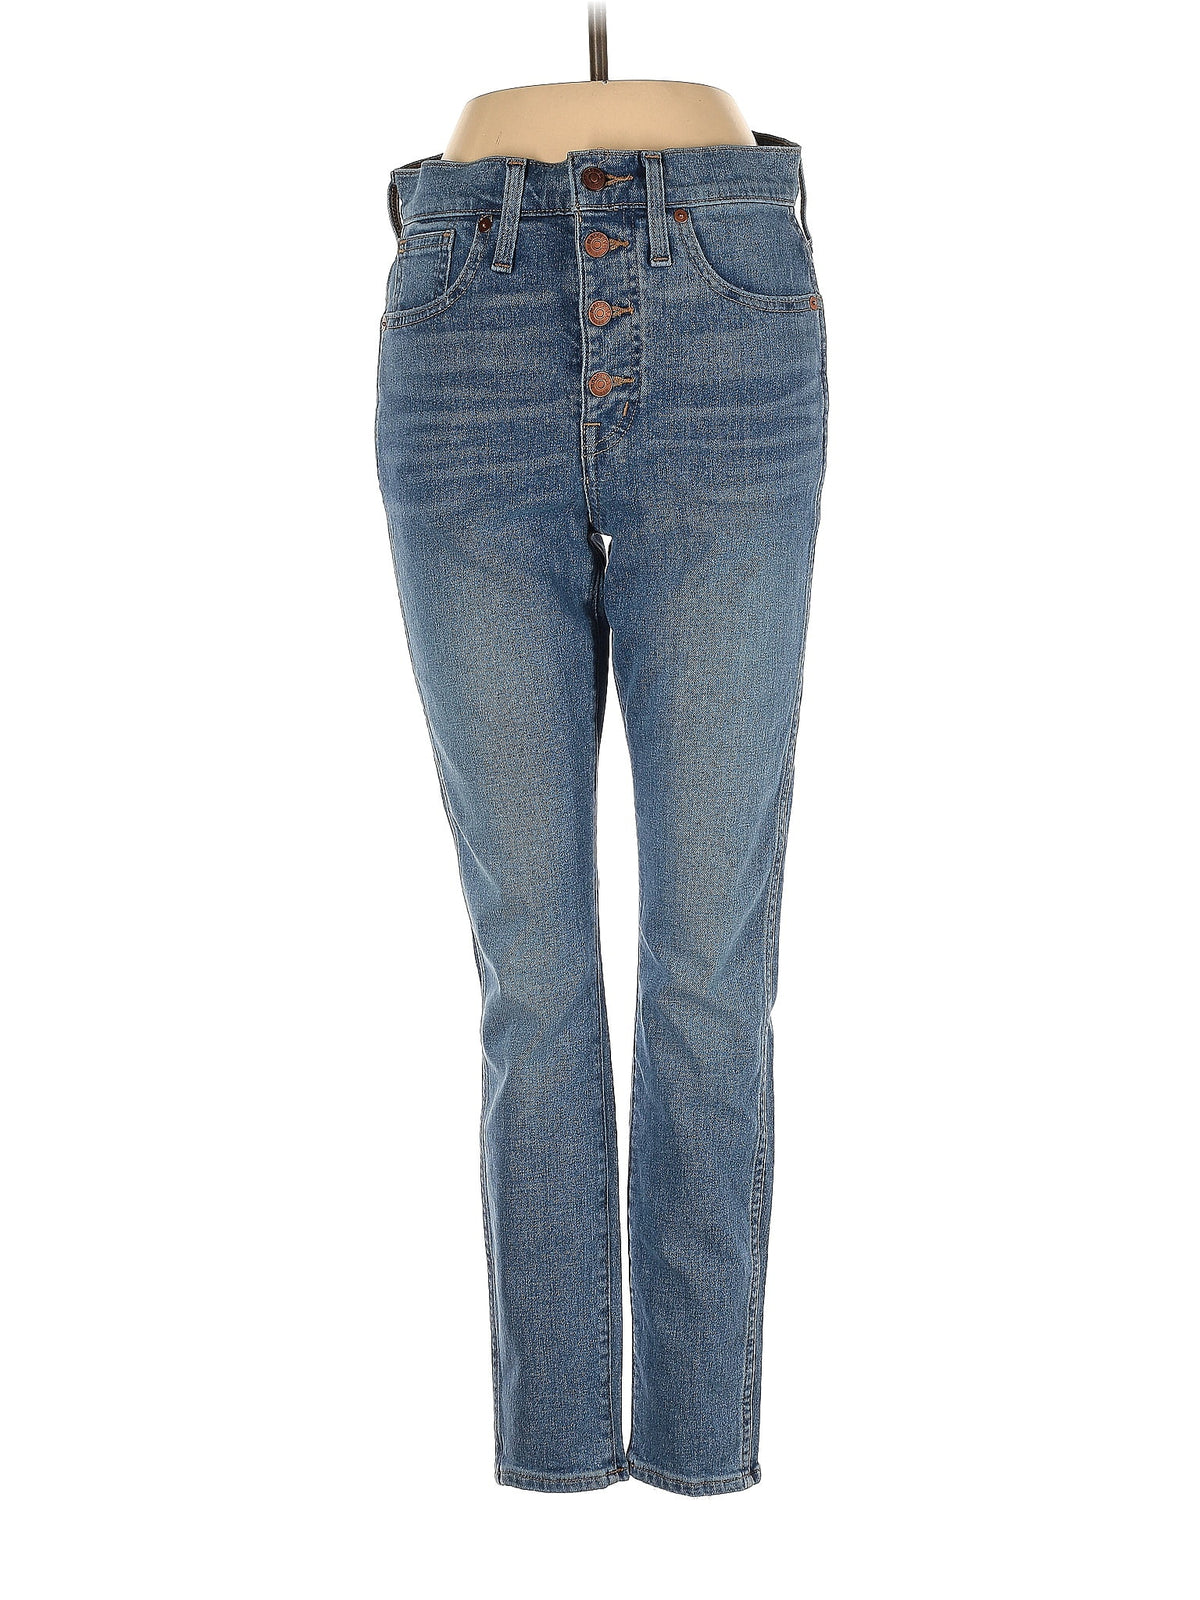 Mid-Rise Boyjeans Jeans in Medium Wash waist size - 26 P